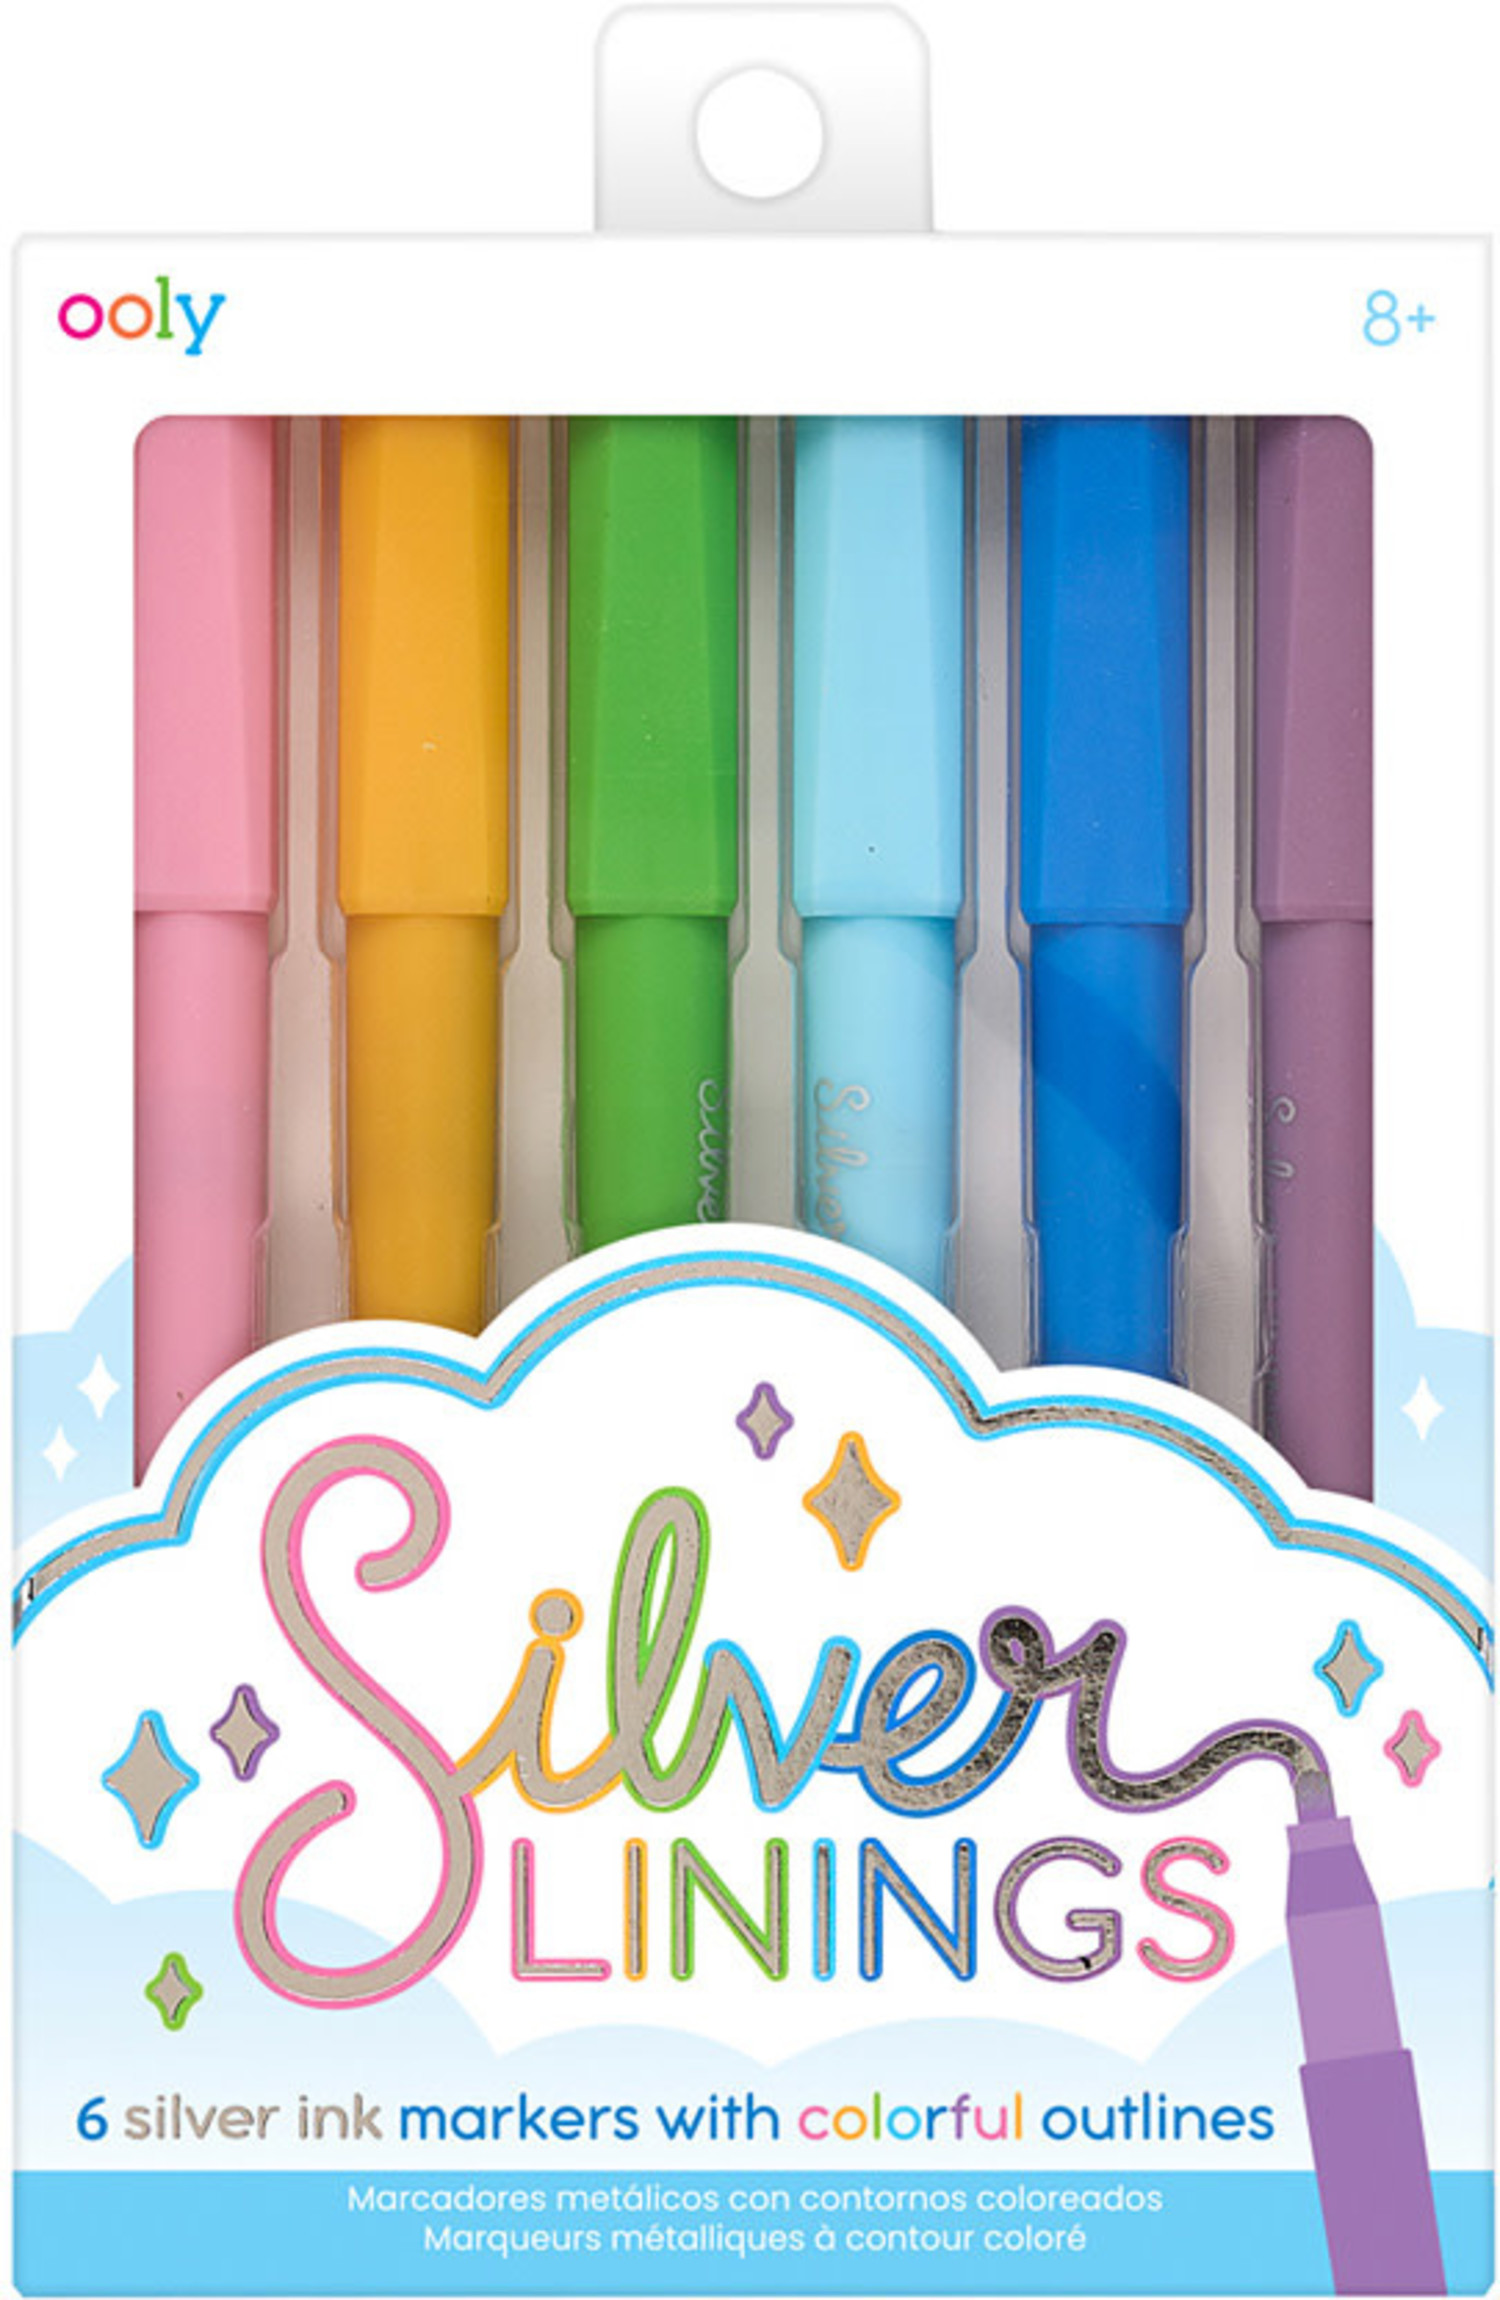 Silver Linings Outline Markers - Mudpuddles Toys and Books